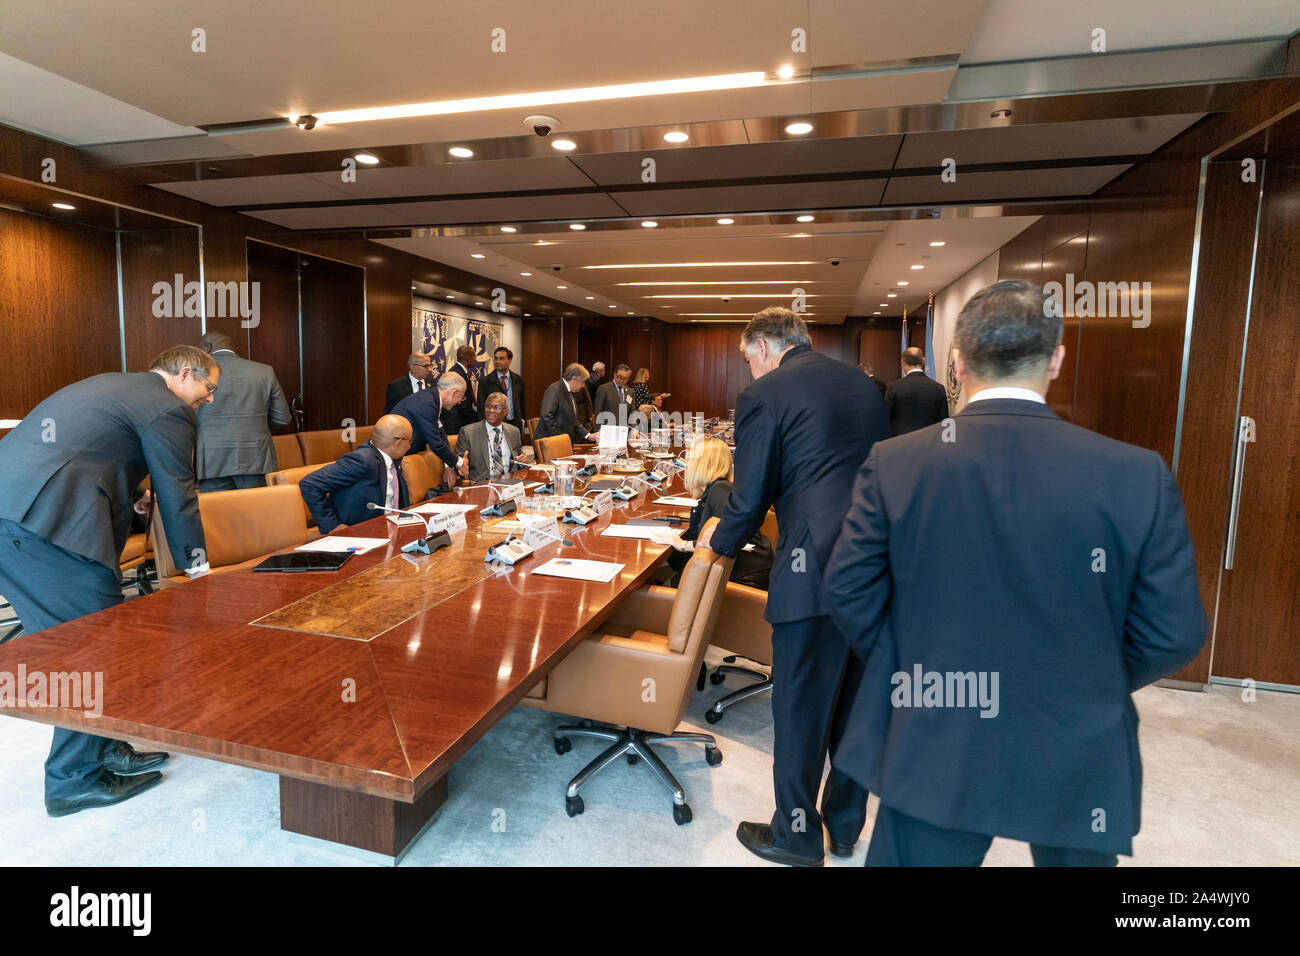 New York, NY - October 16, 2019: UN Secretary-General Antonio Guterres hosts Inaugural Meeting of the Global Investors for Sustainable Development Alliance at UN Headquarters Stock Photo